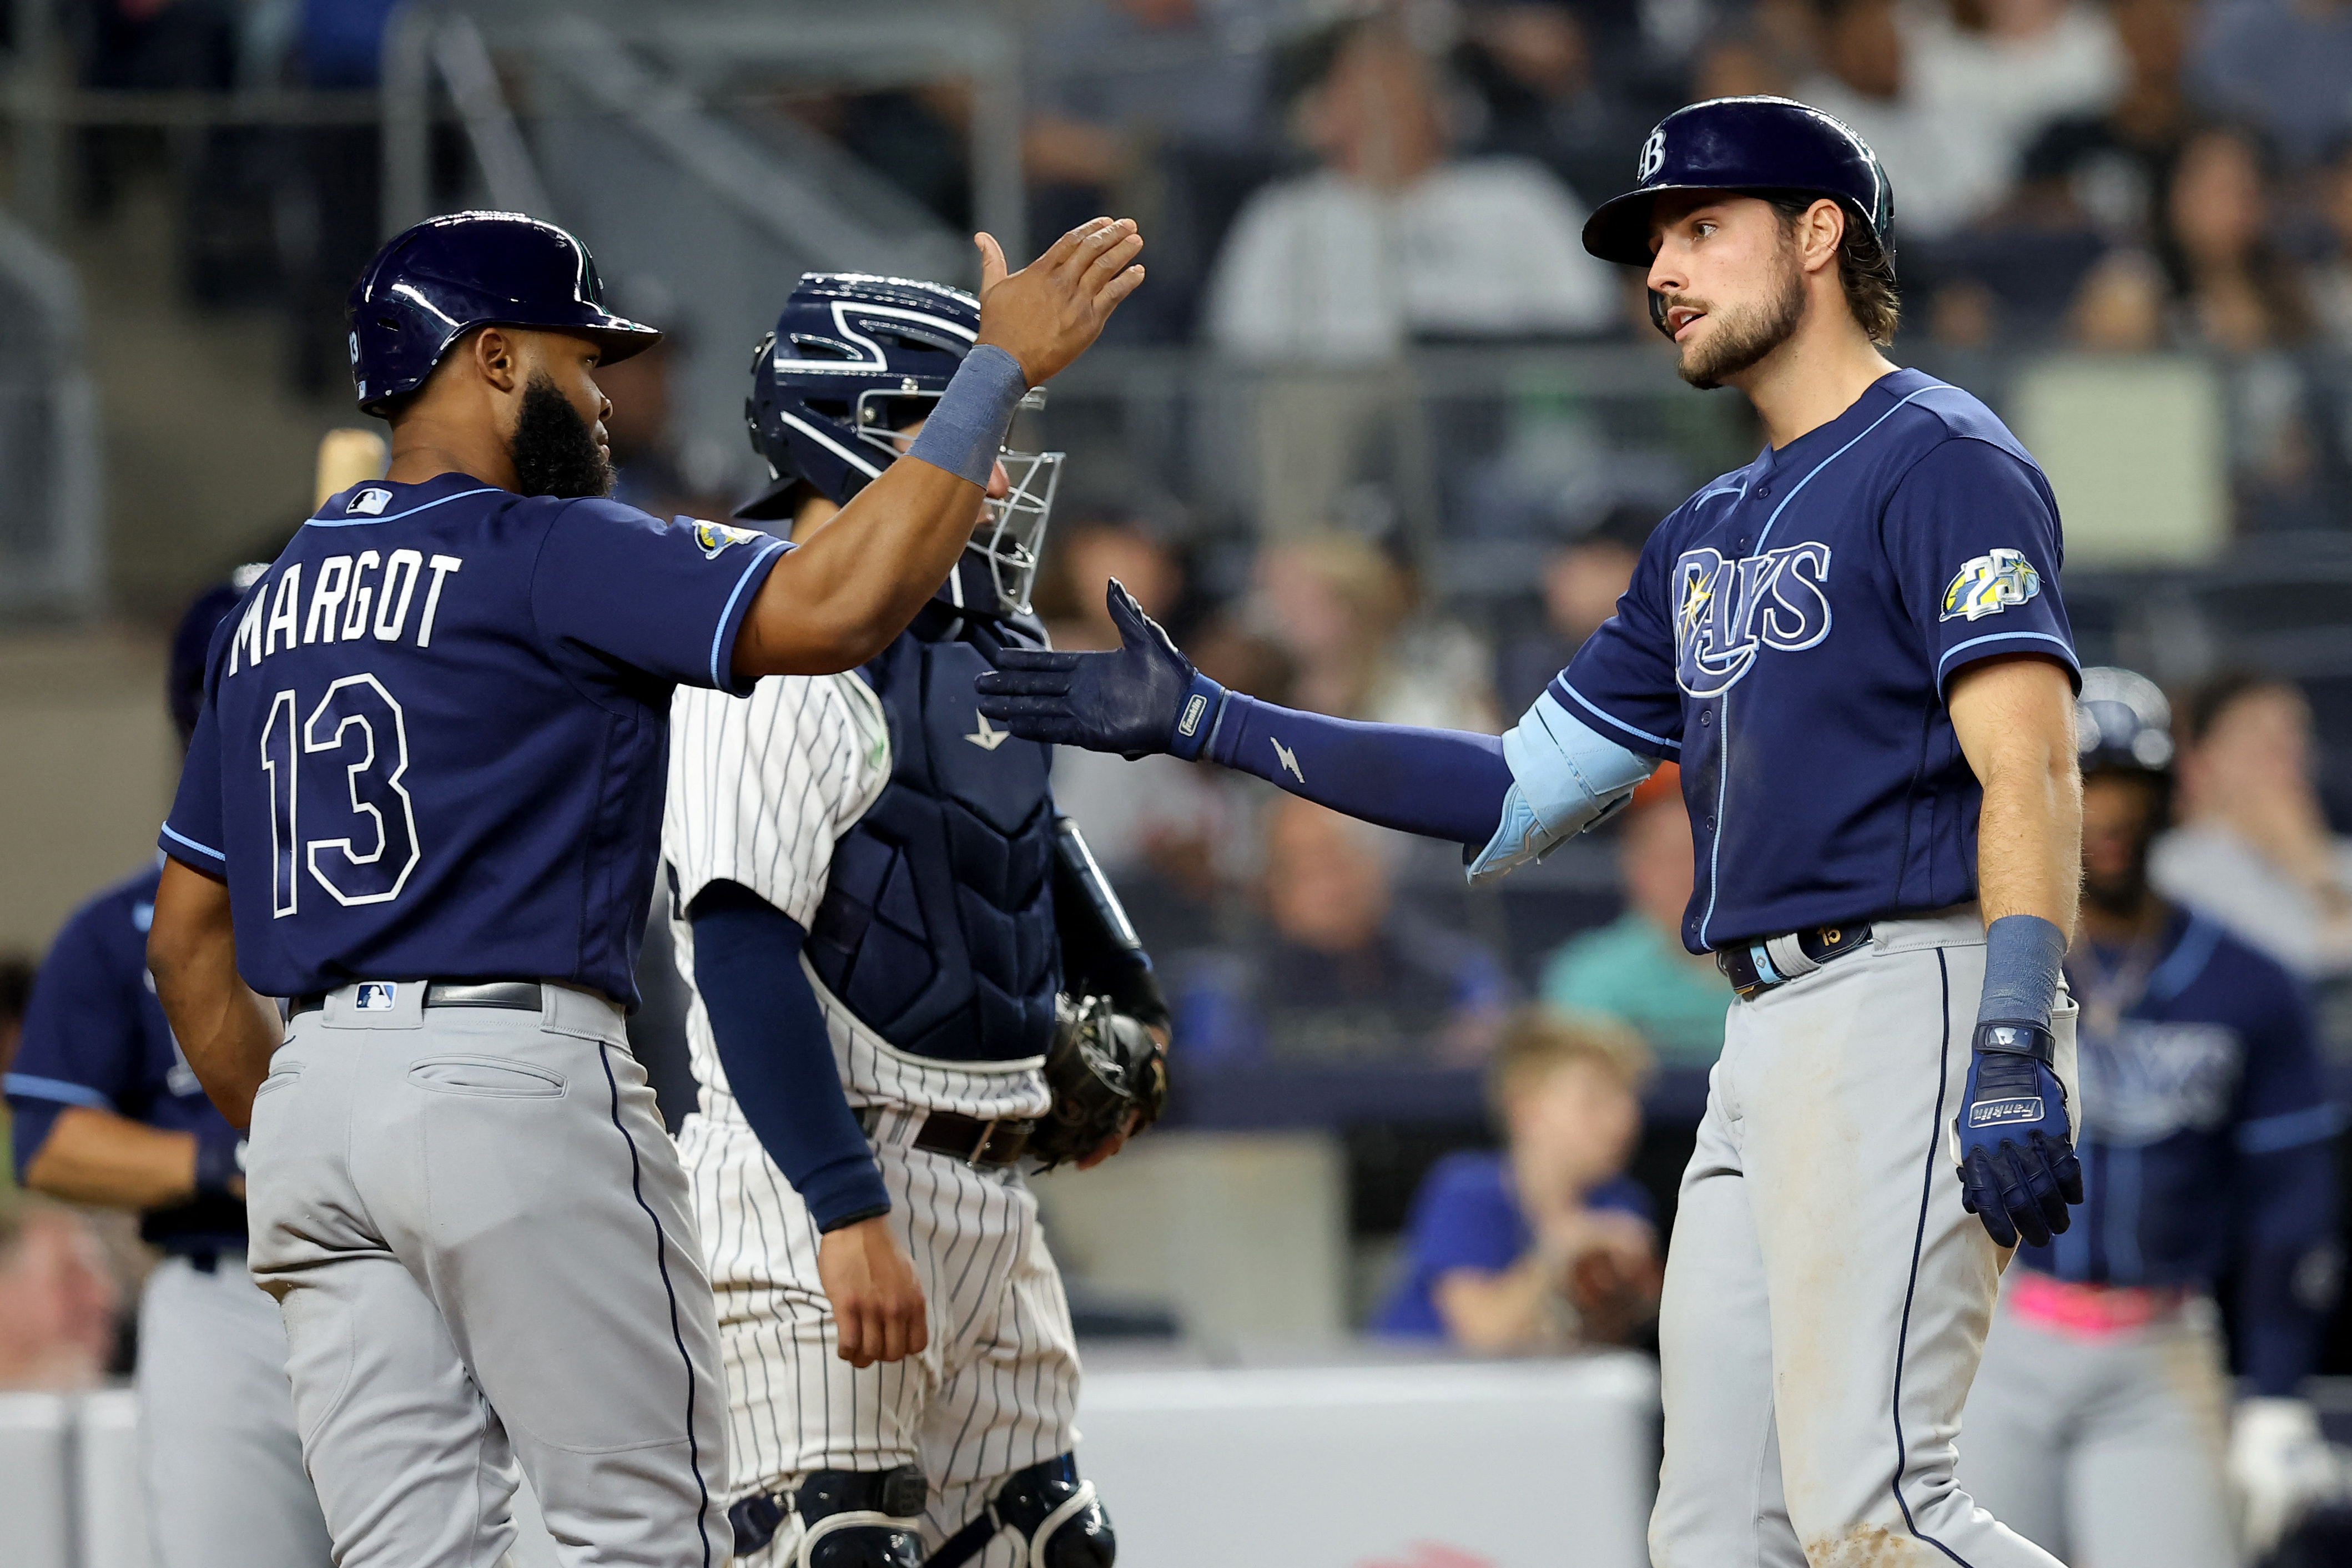 Nathan Eovaldi tosses complete game shutout as Yankees bats go